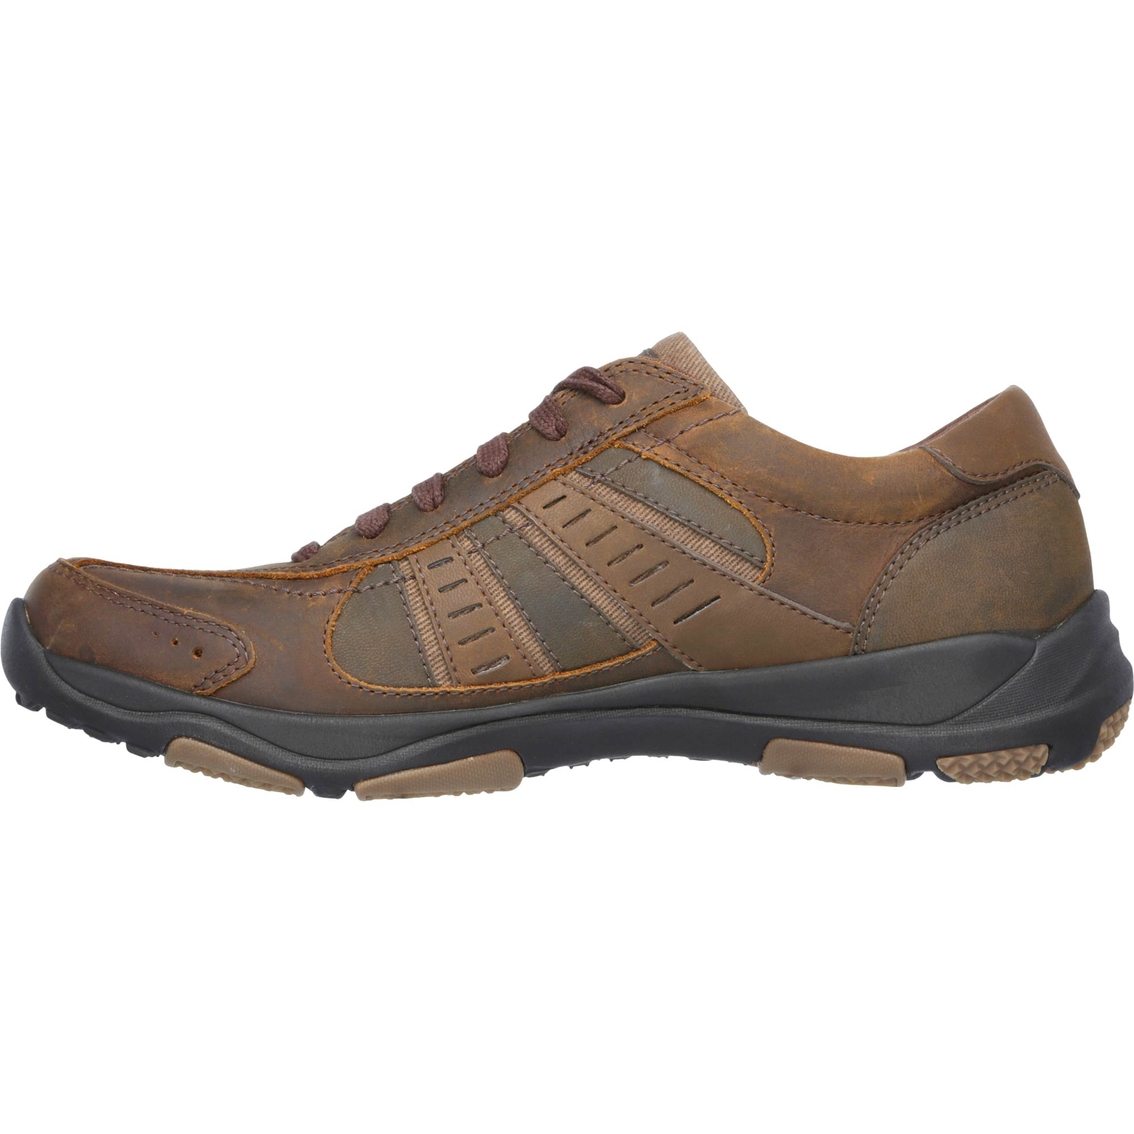 Skechers Larson Nerick Casual Lace Up Shoes - Image 2 of 4